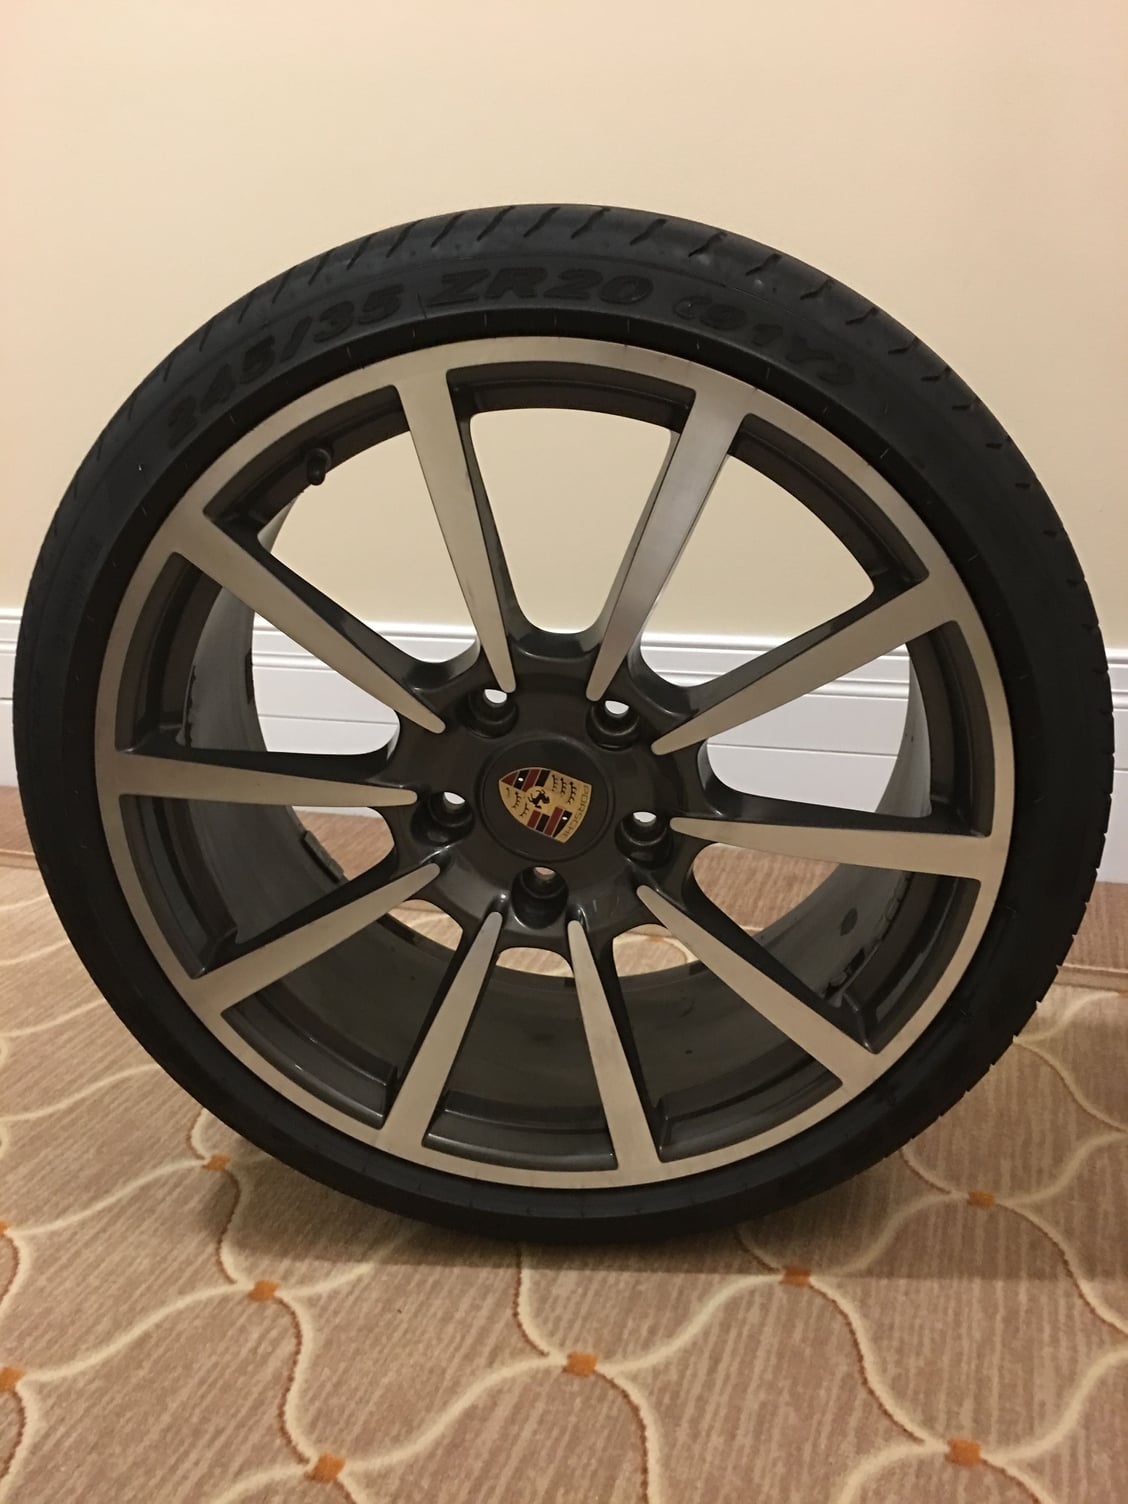 Wheels and Tires/Axles - Set of 991 Carrera Classic Wheels Tires (incl center caps & TPMS) - Used - 2012 to 2018 Porsche 911 - Philadelphia, PA 19103, United States